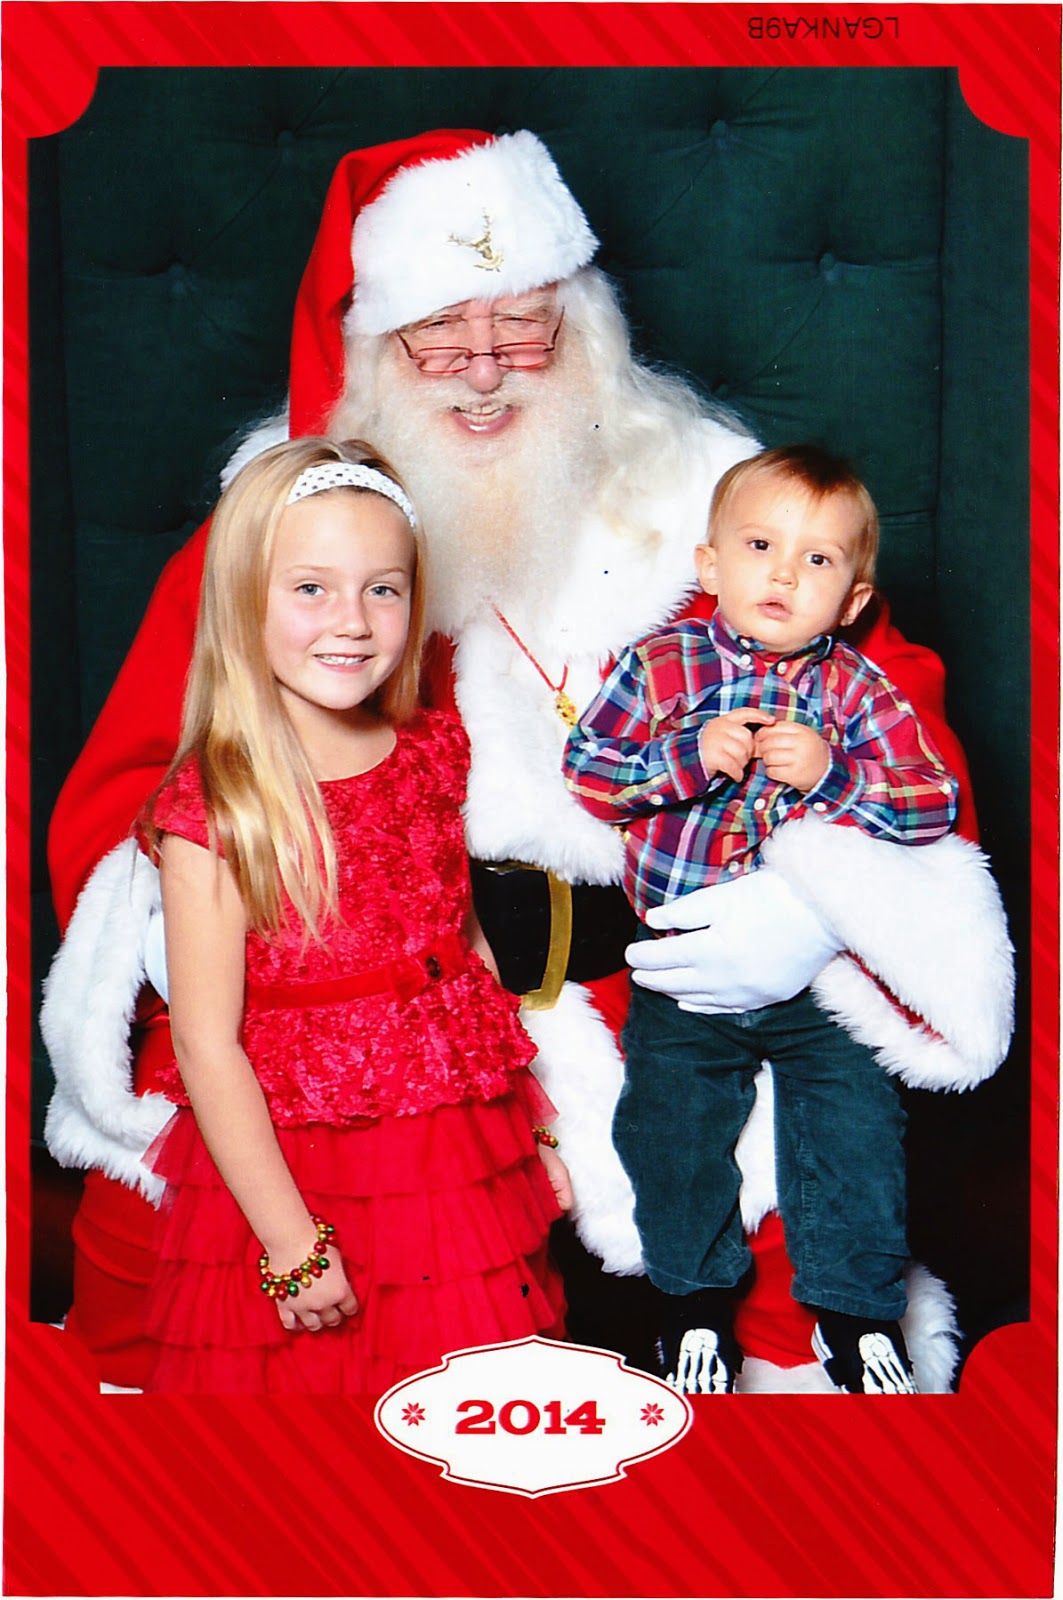 Cousin Belle and Reef Indy with the Mall Santa.